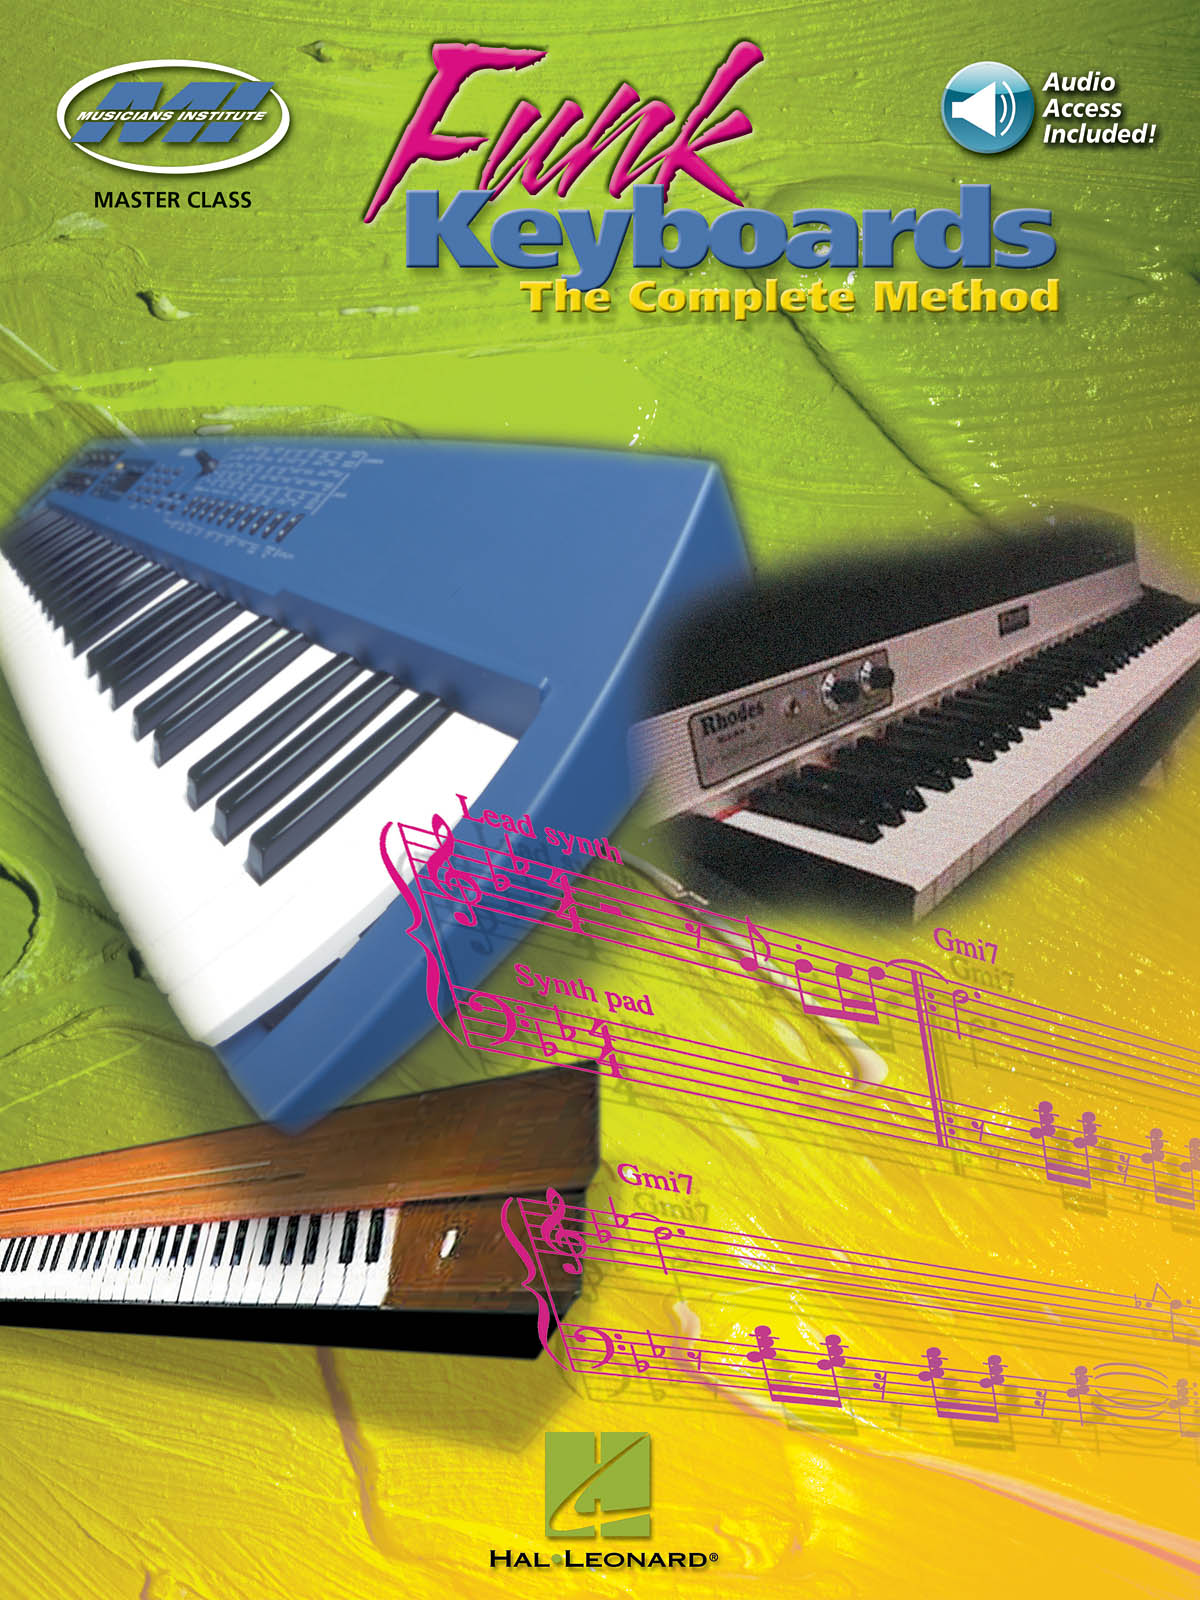 Gail Johnson: Funk Keyboards – The Complete Method